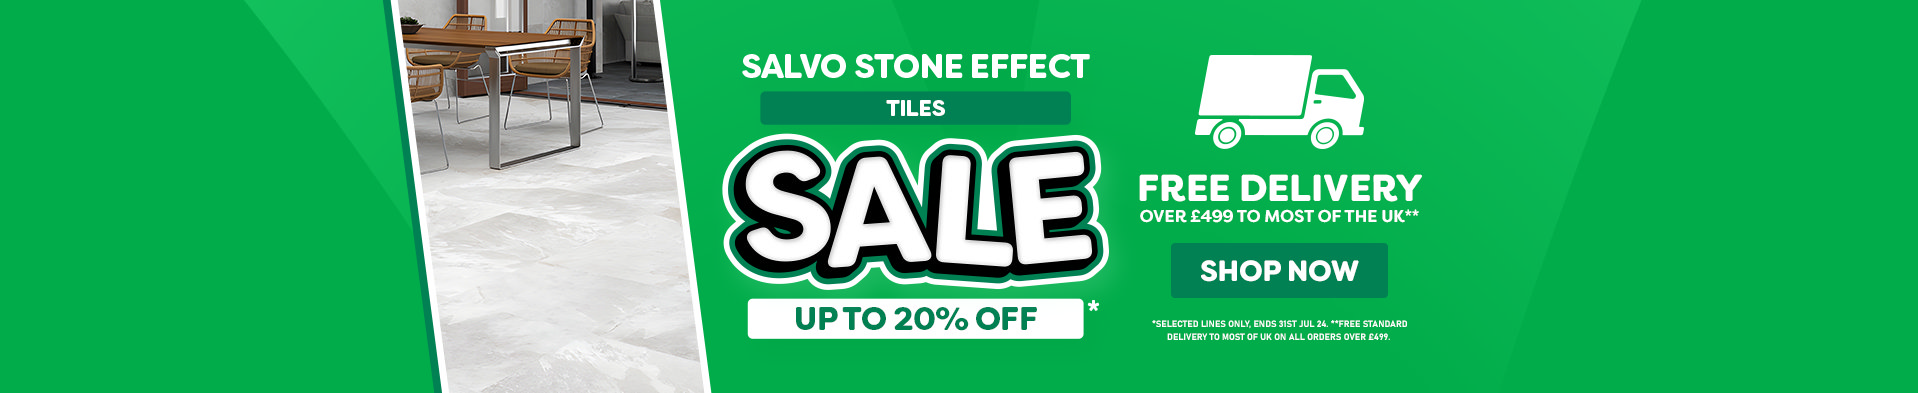 Salvo Tile Sale - Free Delivery